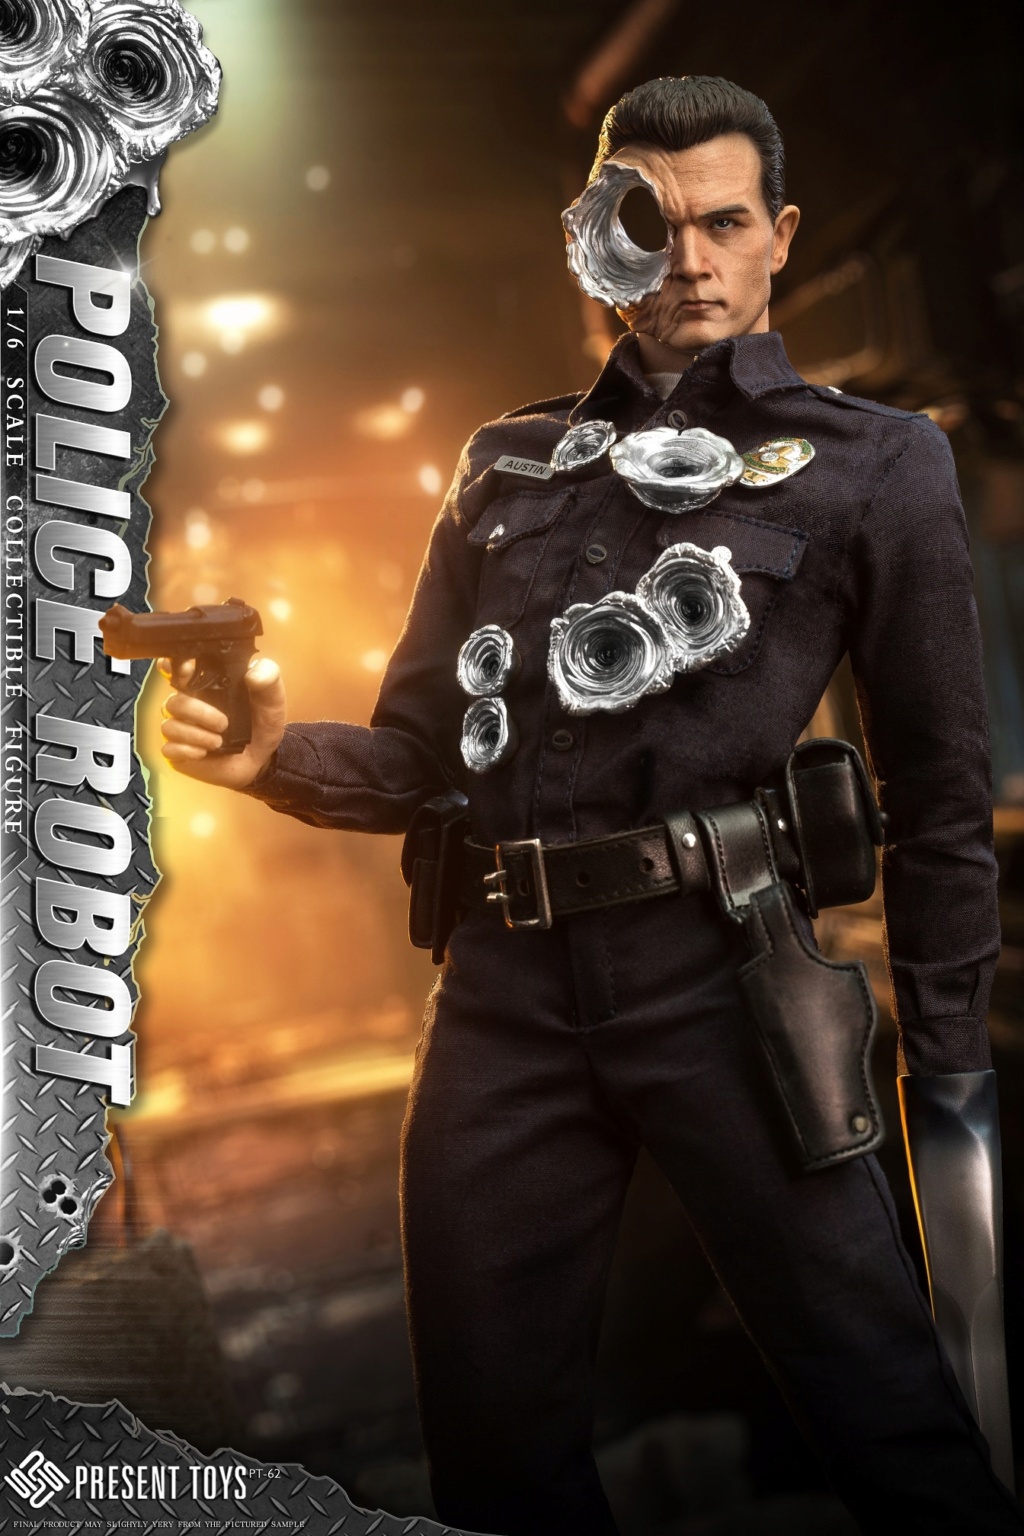 Sci-Fi - NEW PRODUCT: Present Toys: 1/6 Robot Police T1000 Action Figure #PT-sp62 14542510